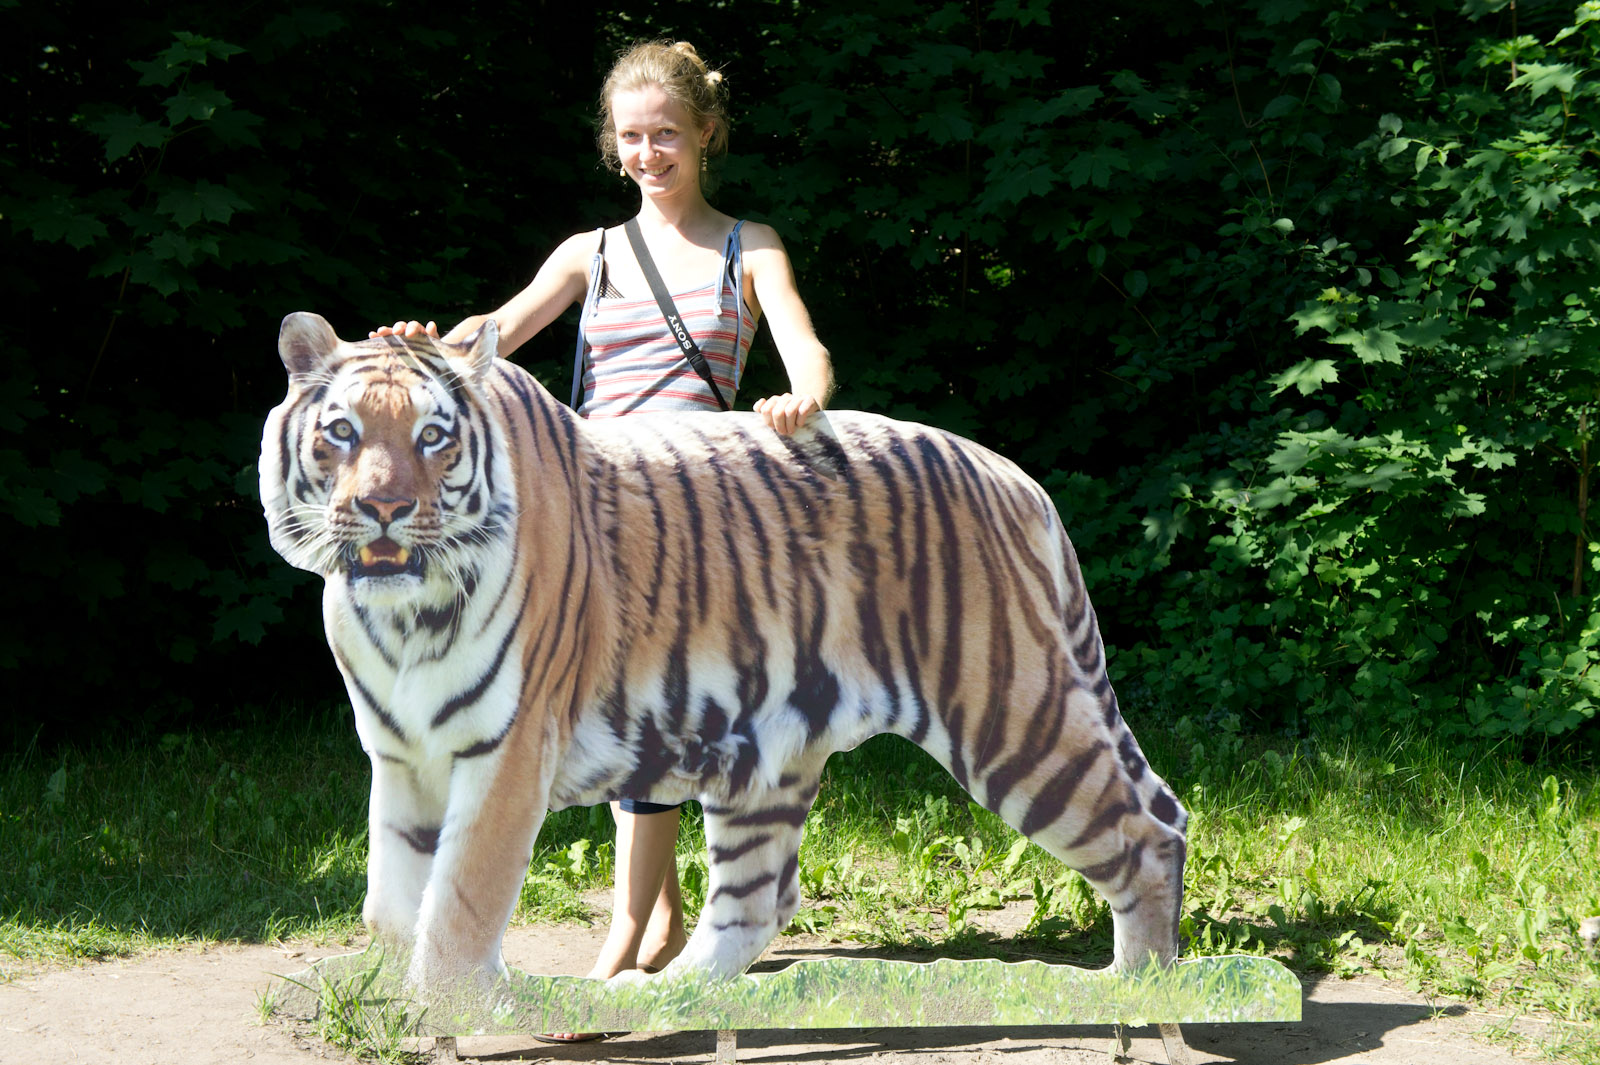 Hanne with a tiger